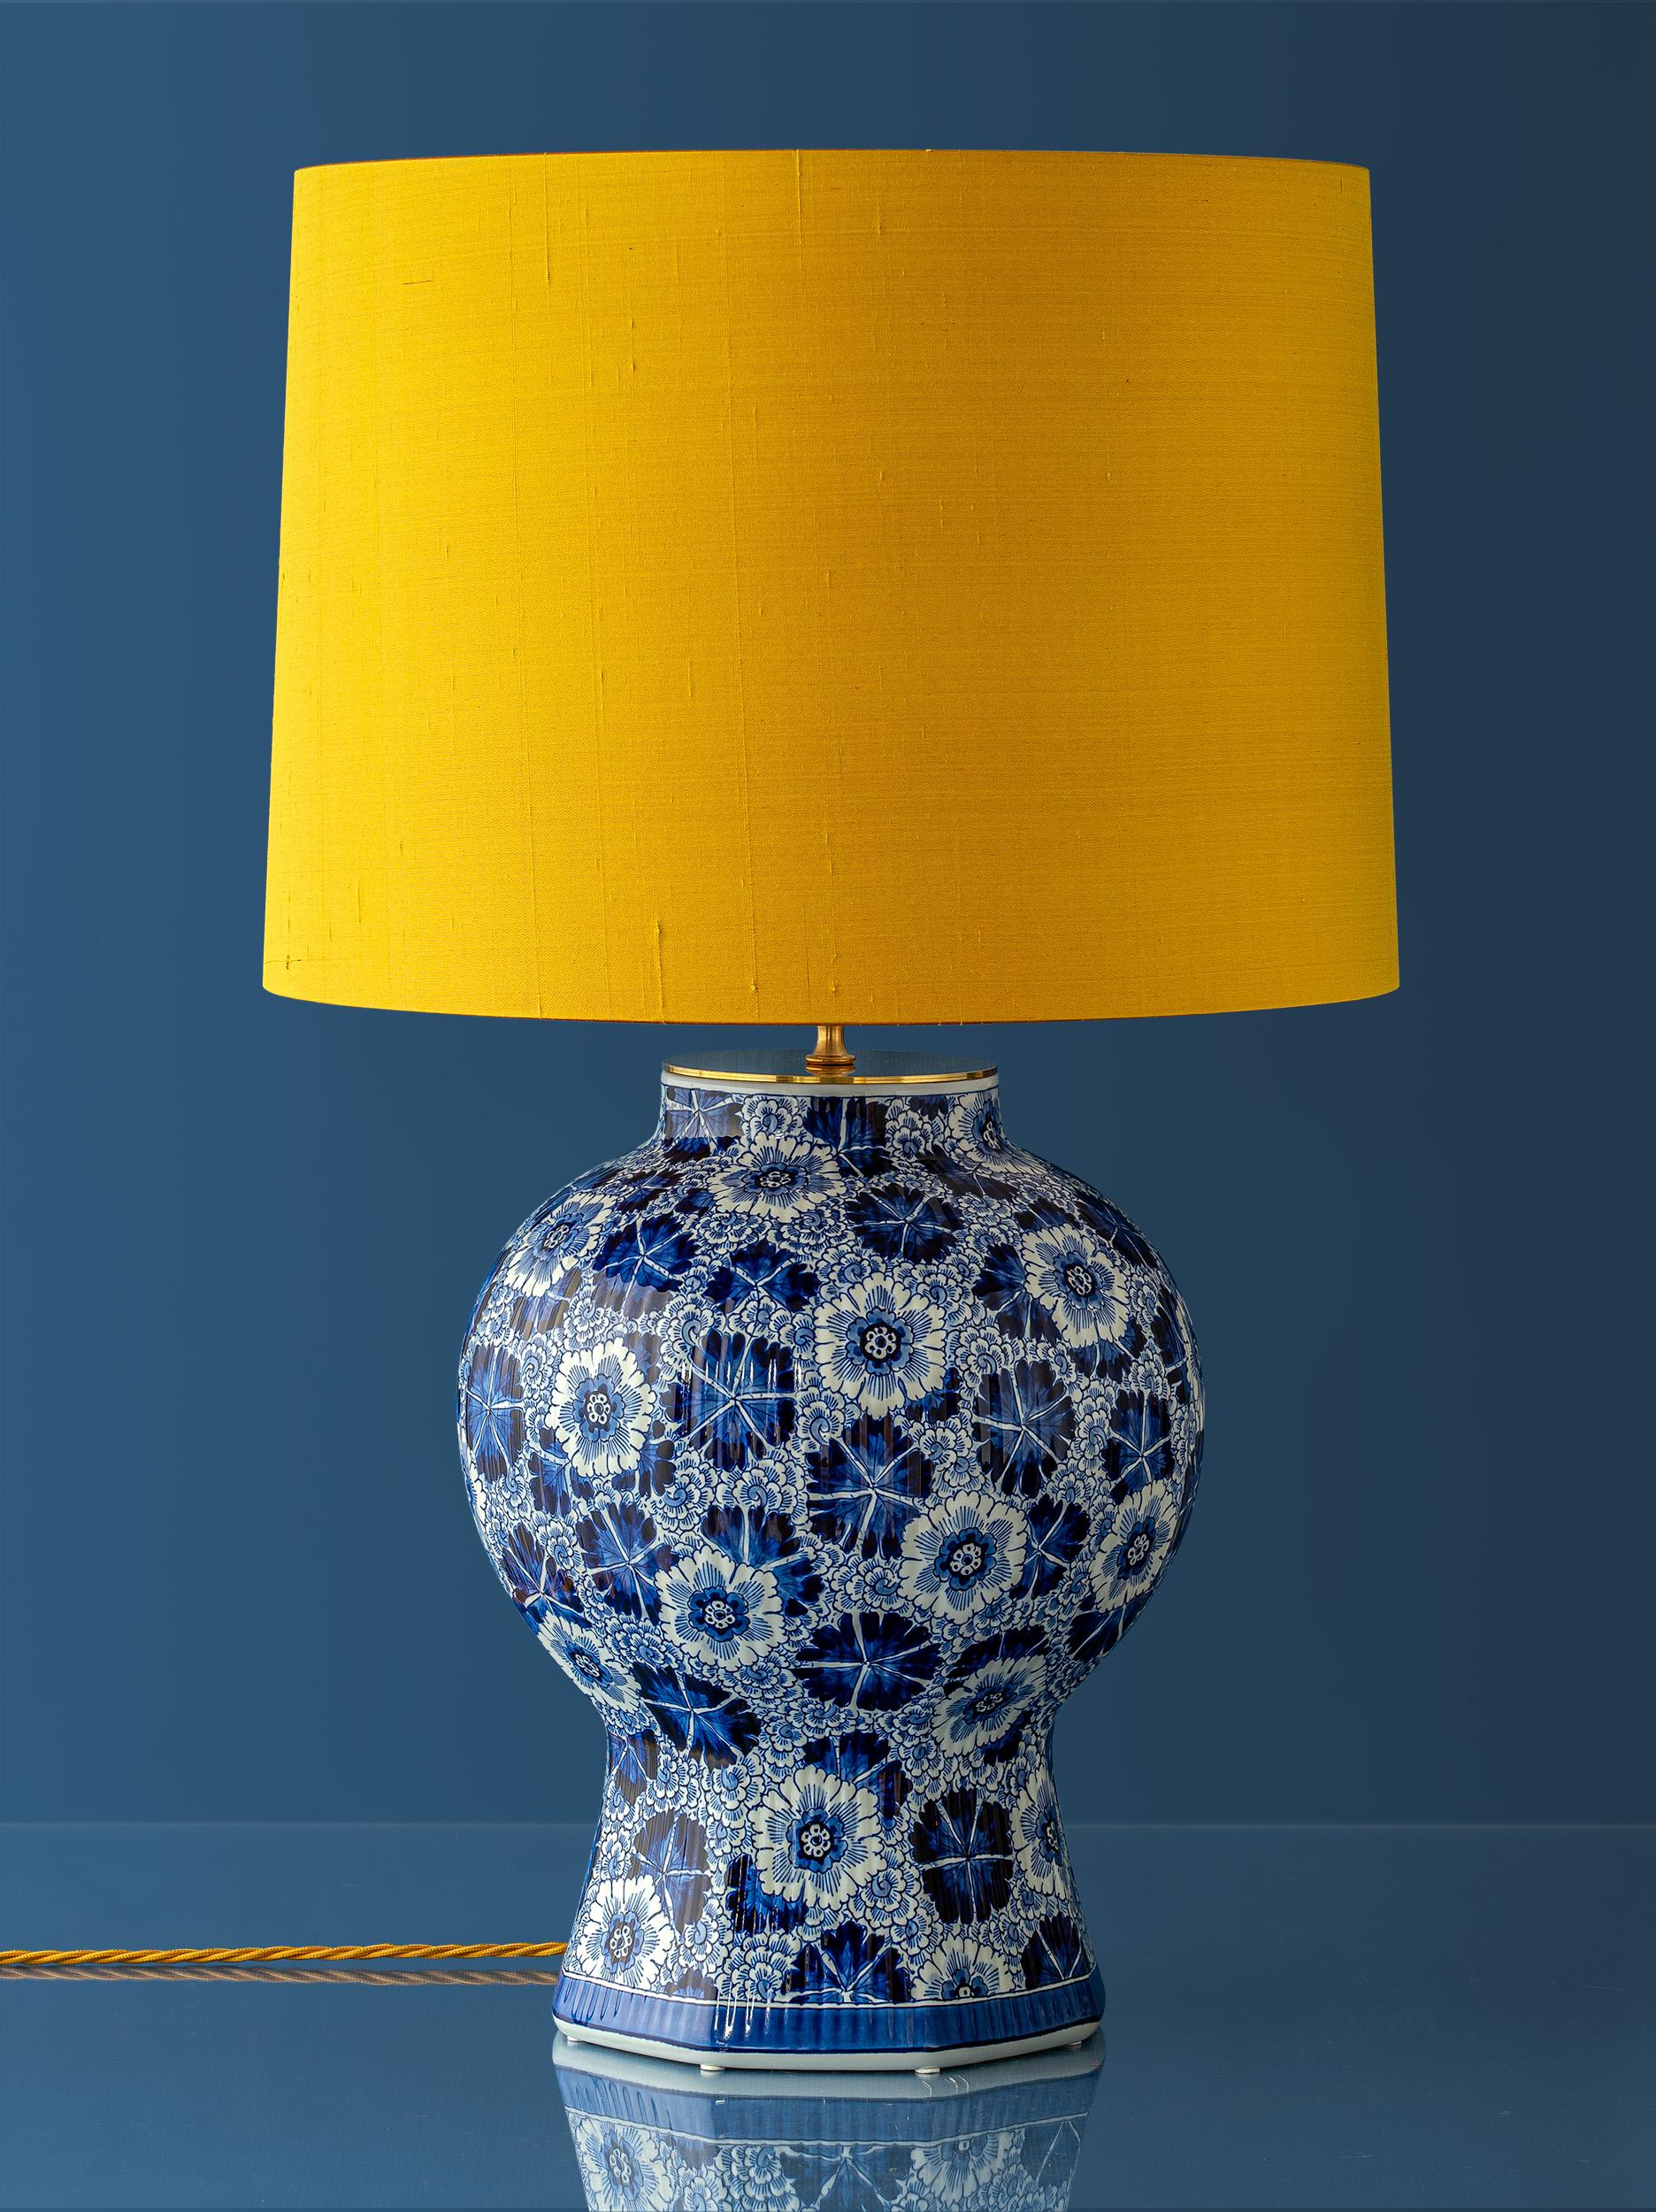 Introducing this Royal Delft masterpiece: a limited-edition, hand-painted, and handcrafted table lamp that brings a historic design into the present day. Meticulously crafted by Royal Delft's skilled artisans, the first lamp in the series—shown